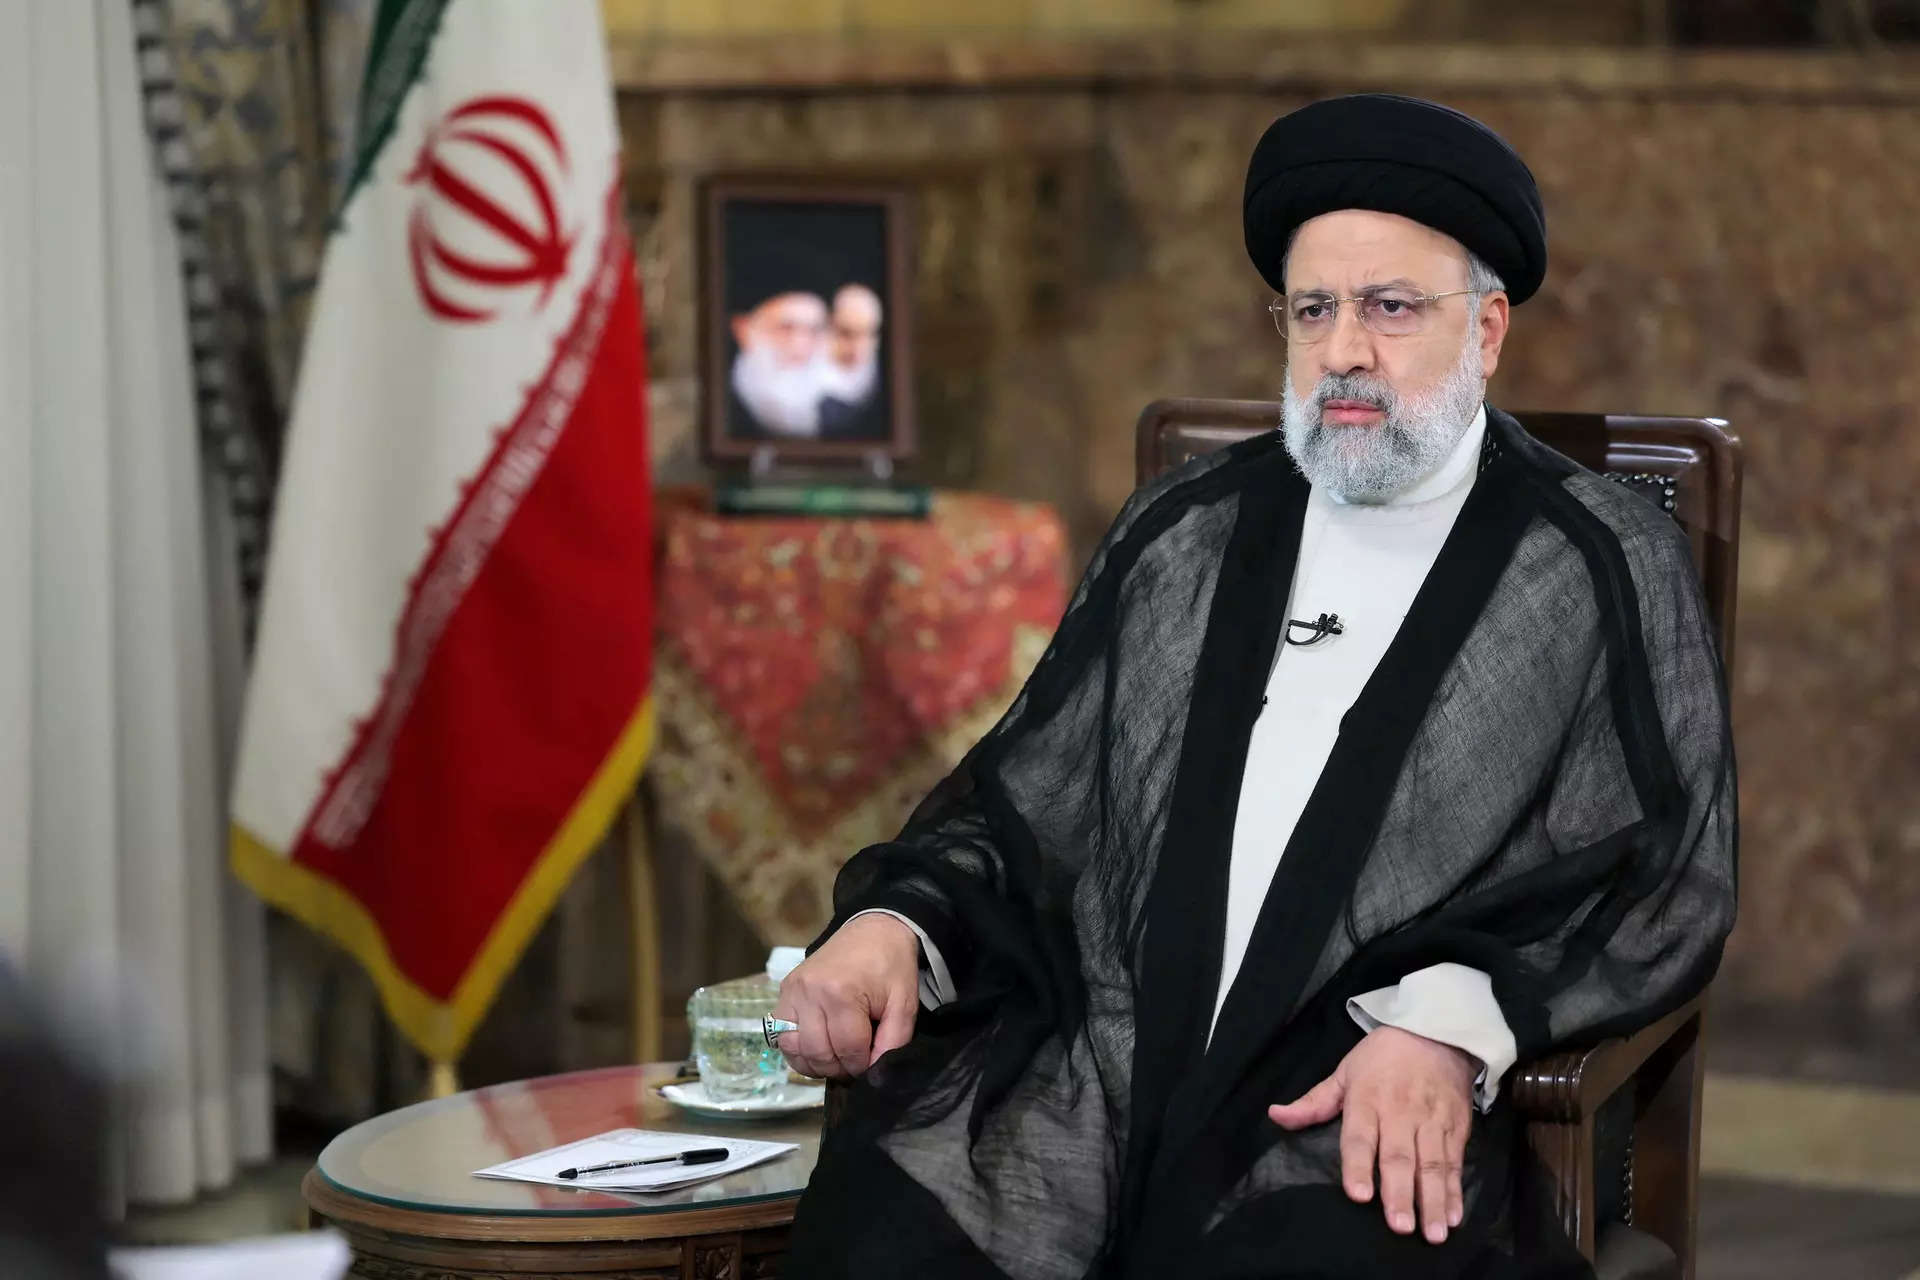 Helicopter carrying Iran's president suffers a 'hard landing,' state TV says without further details 